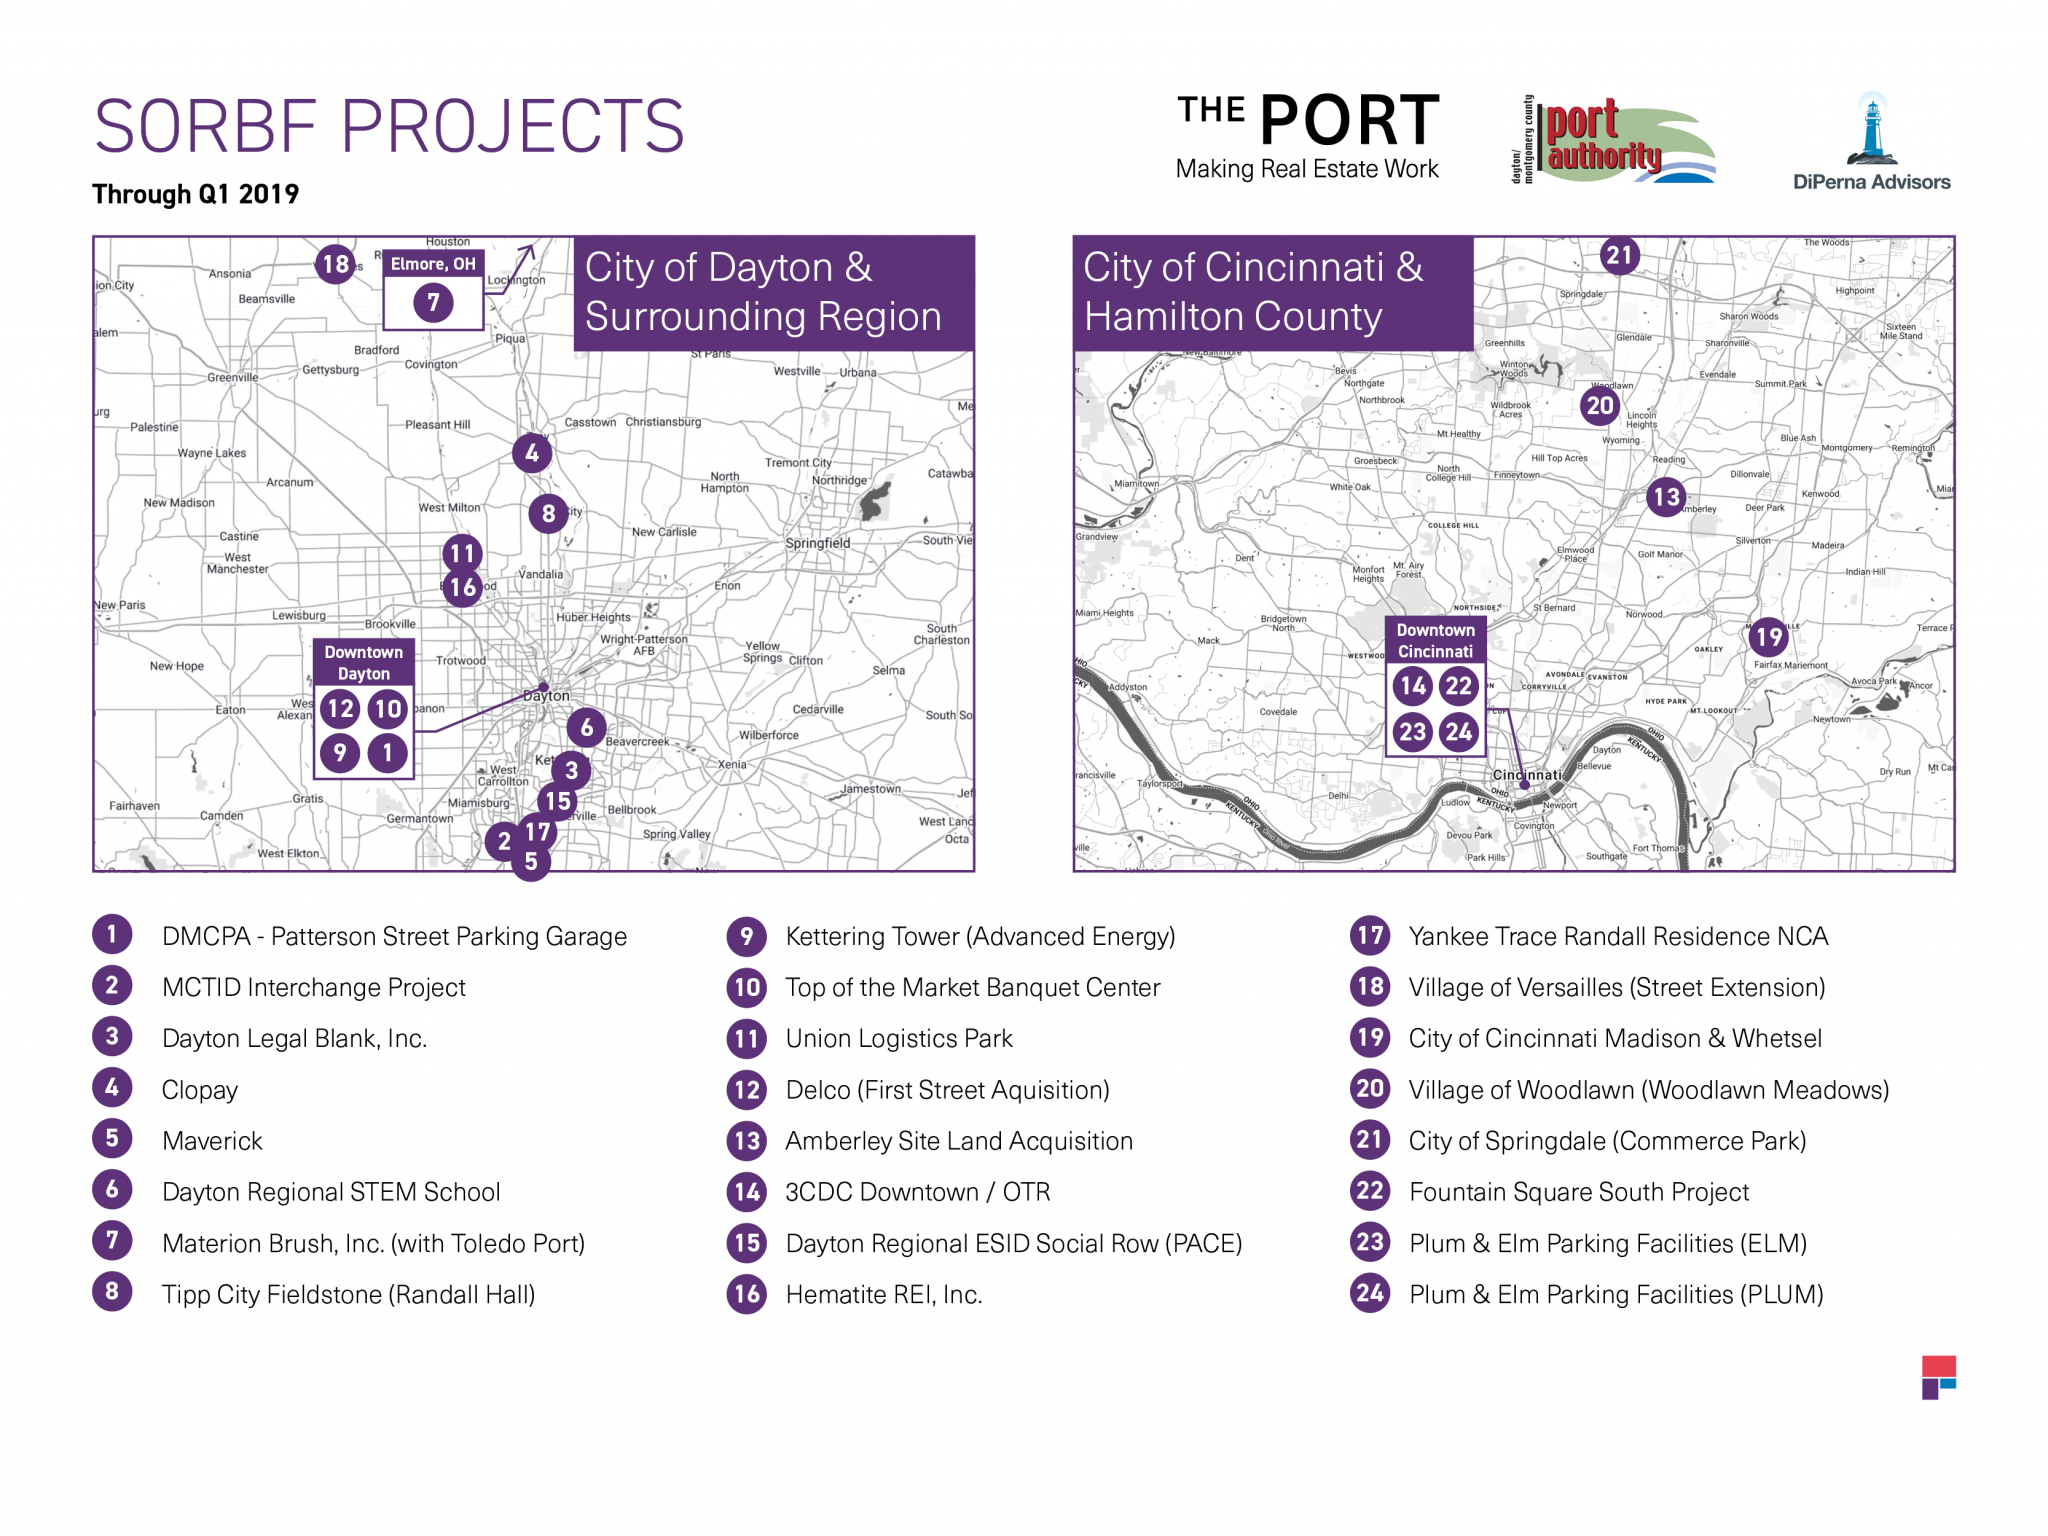 Map of projects supported by the Southwest Ohio Regional Bond Fund in the Dayton Region as well as the Cincinnati Region. Map shows 24 projects through Q1 2019.